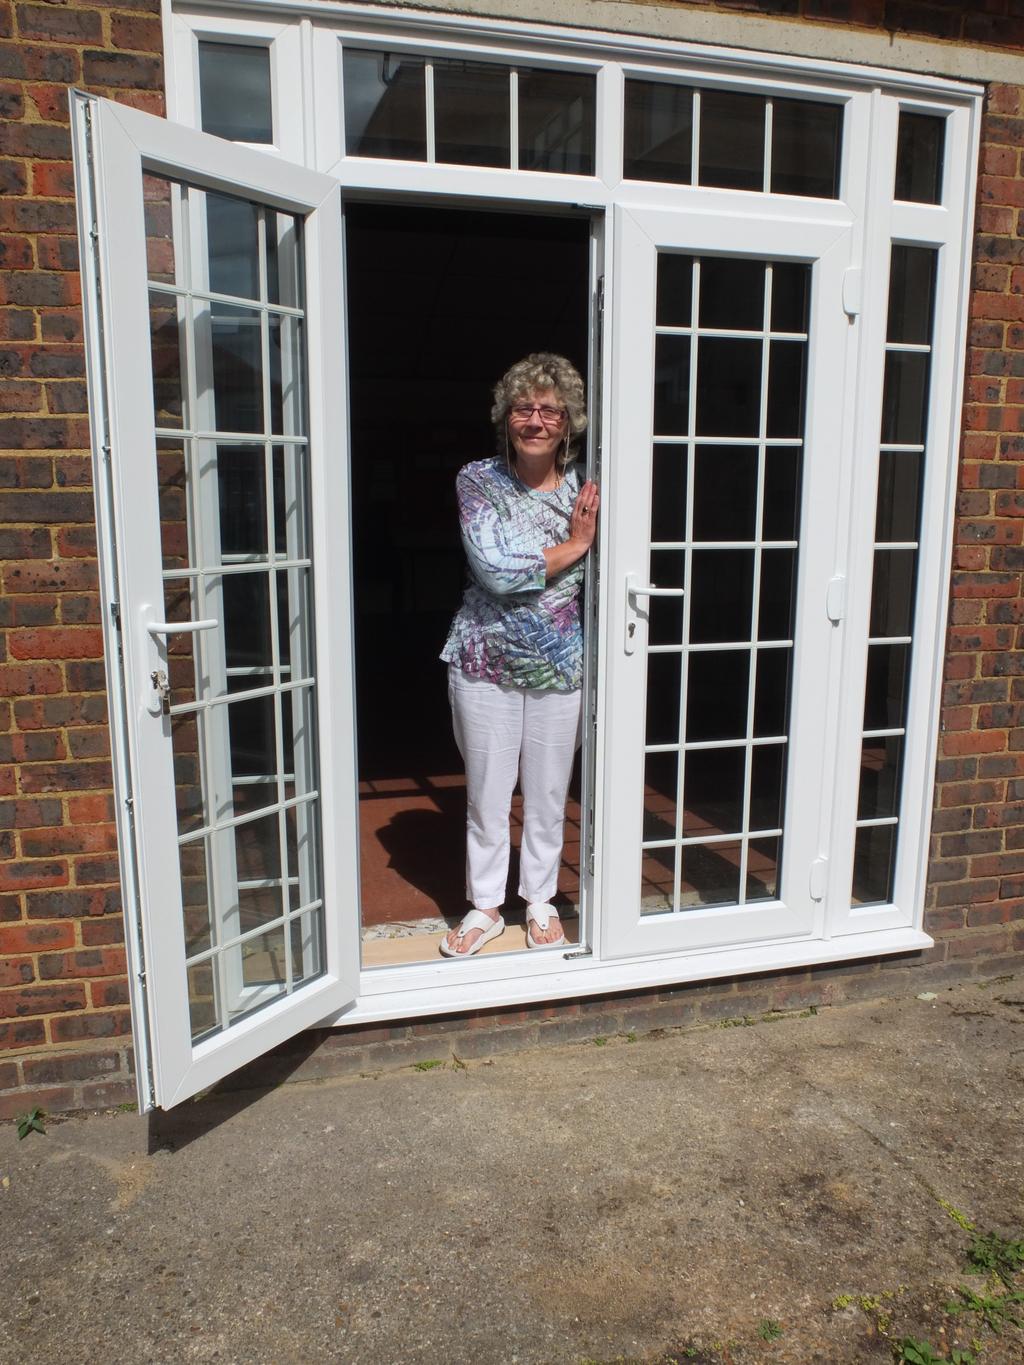 Picture: Margaret Kingswood Jane Wasbrough has been campaigning for doors to provide access to e area outside e hall, and happily is was part of e work covered by Epsom's gift.